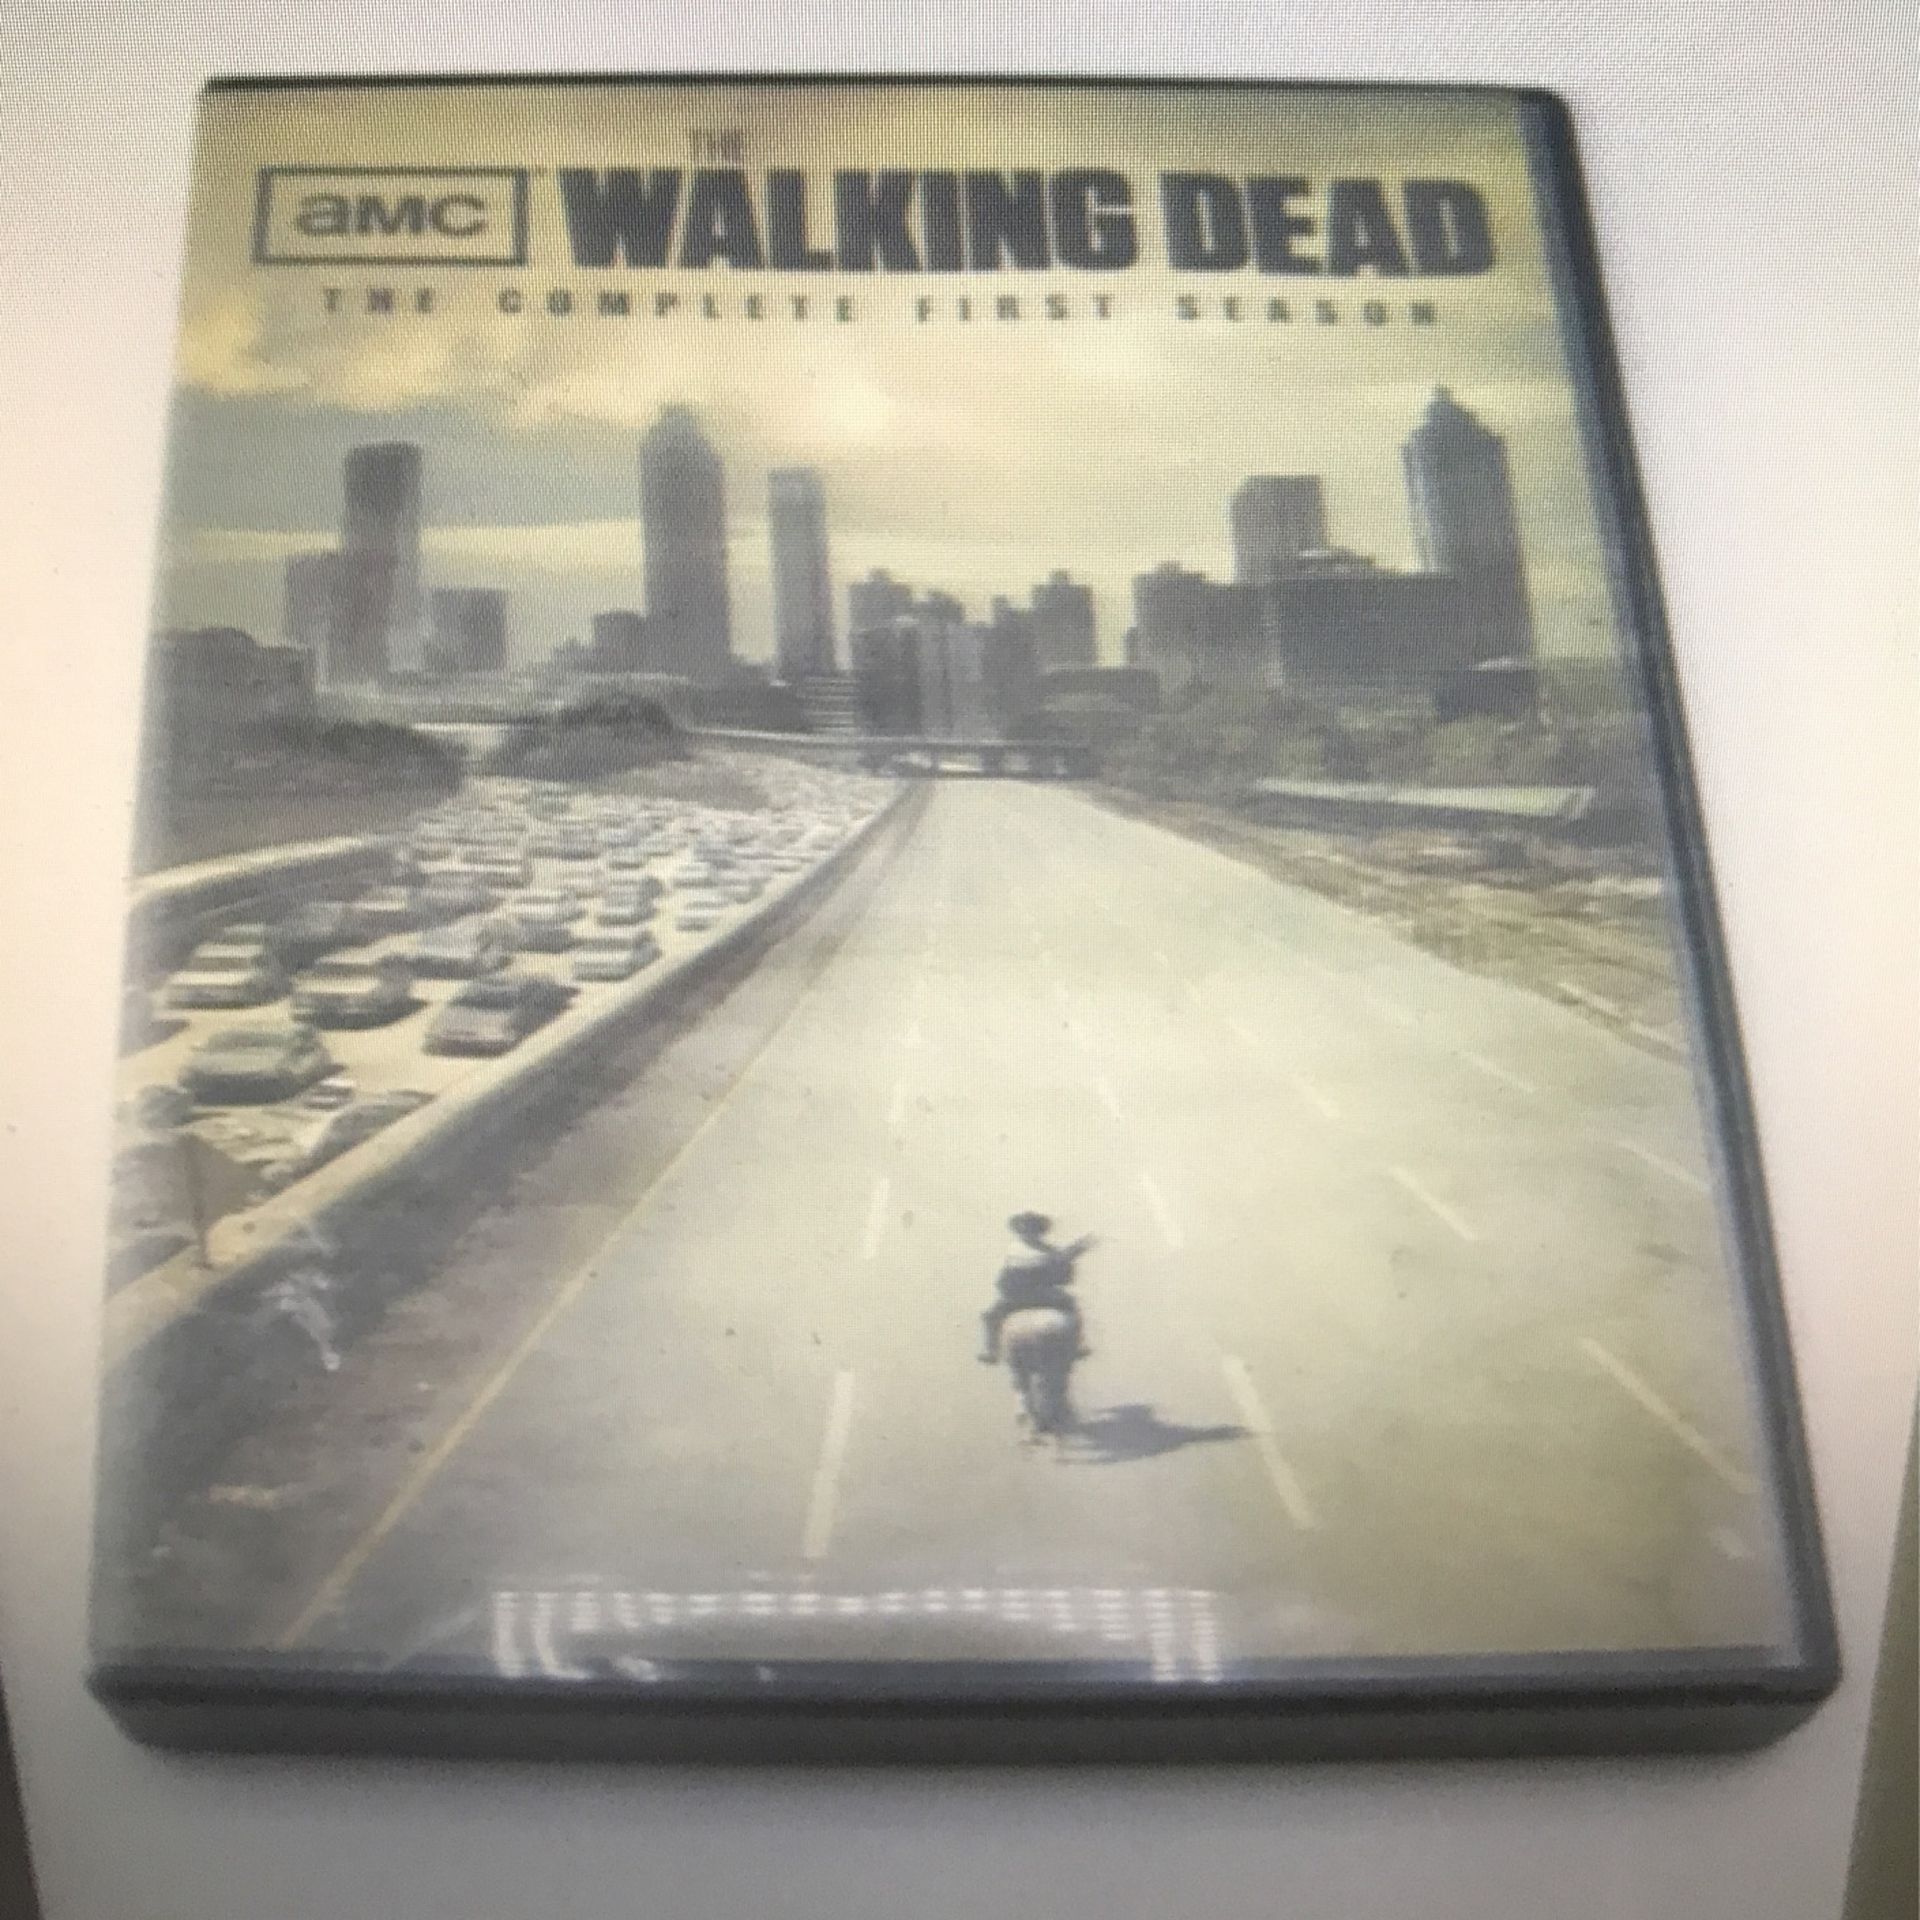 The Walking Dead: The Complete First Season (DVD) (widescreen) (Not Rated)